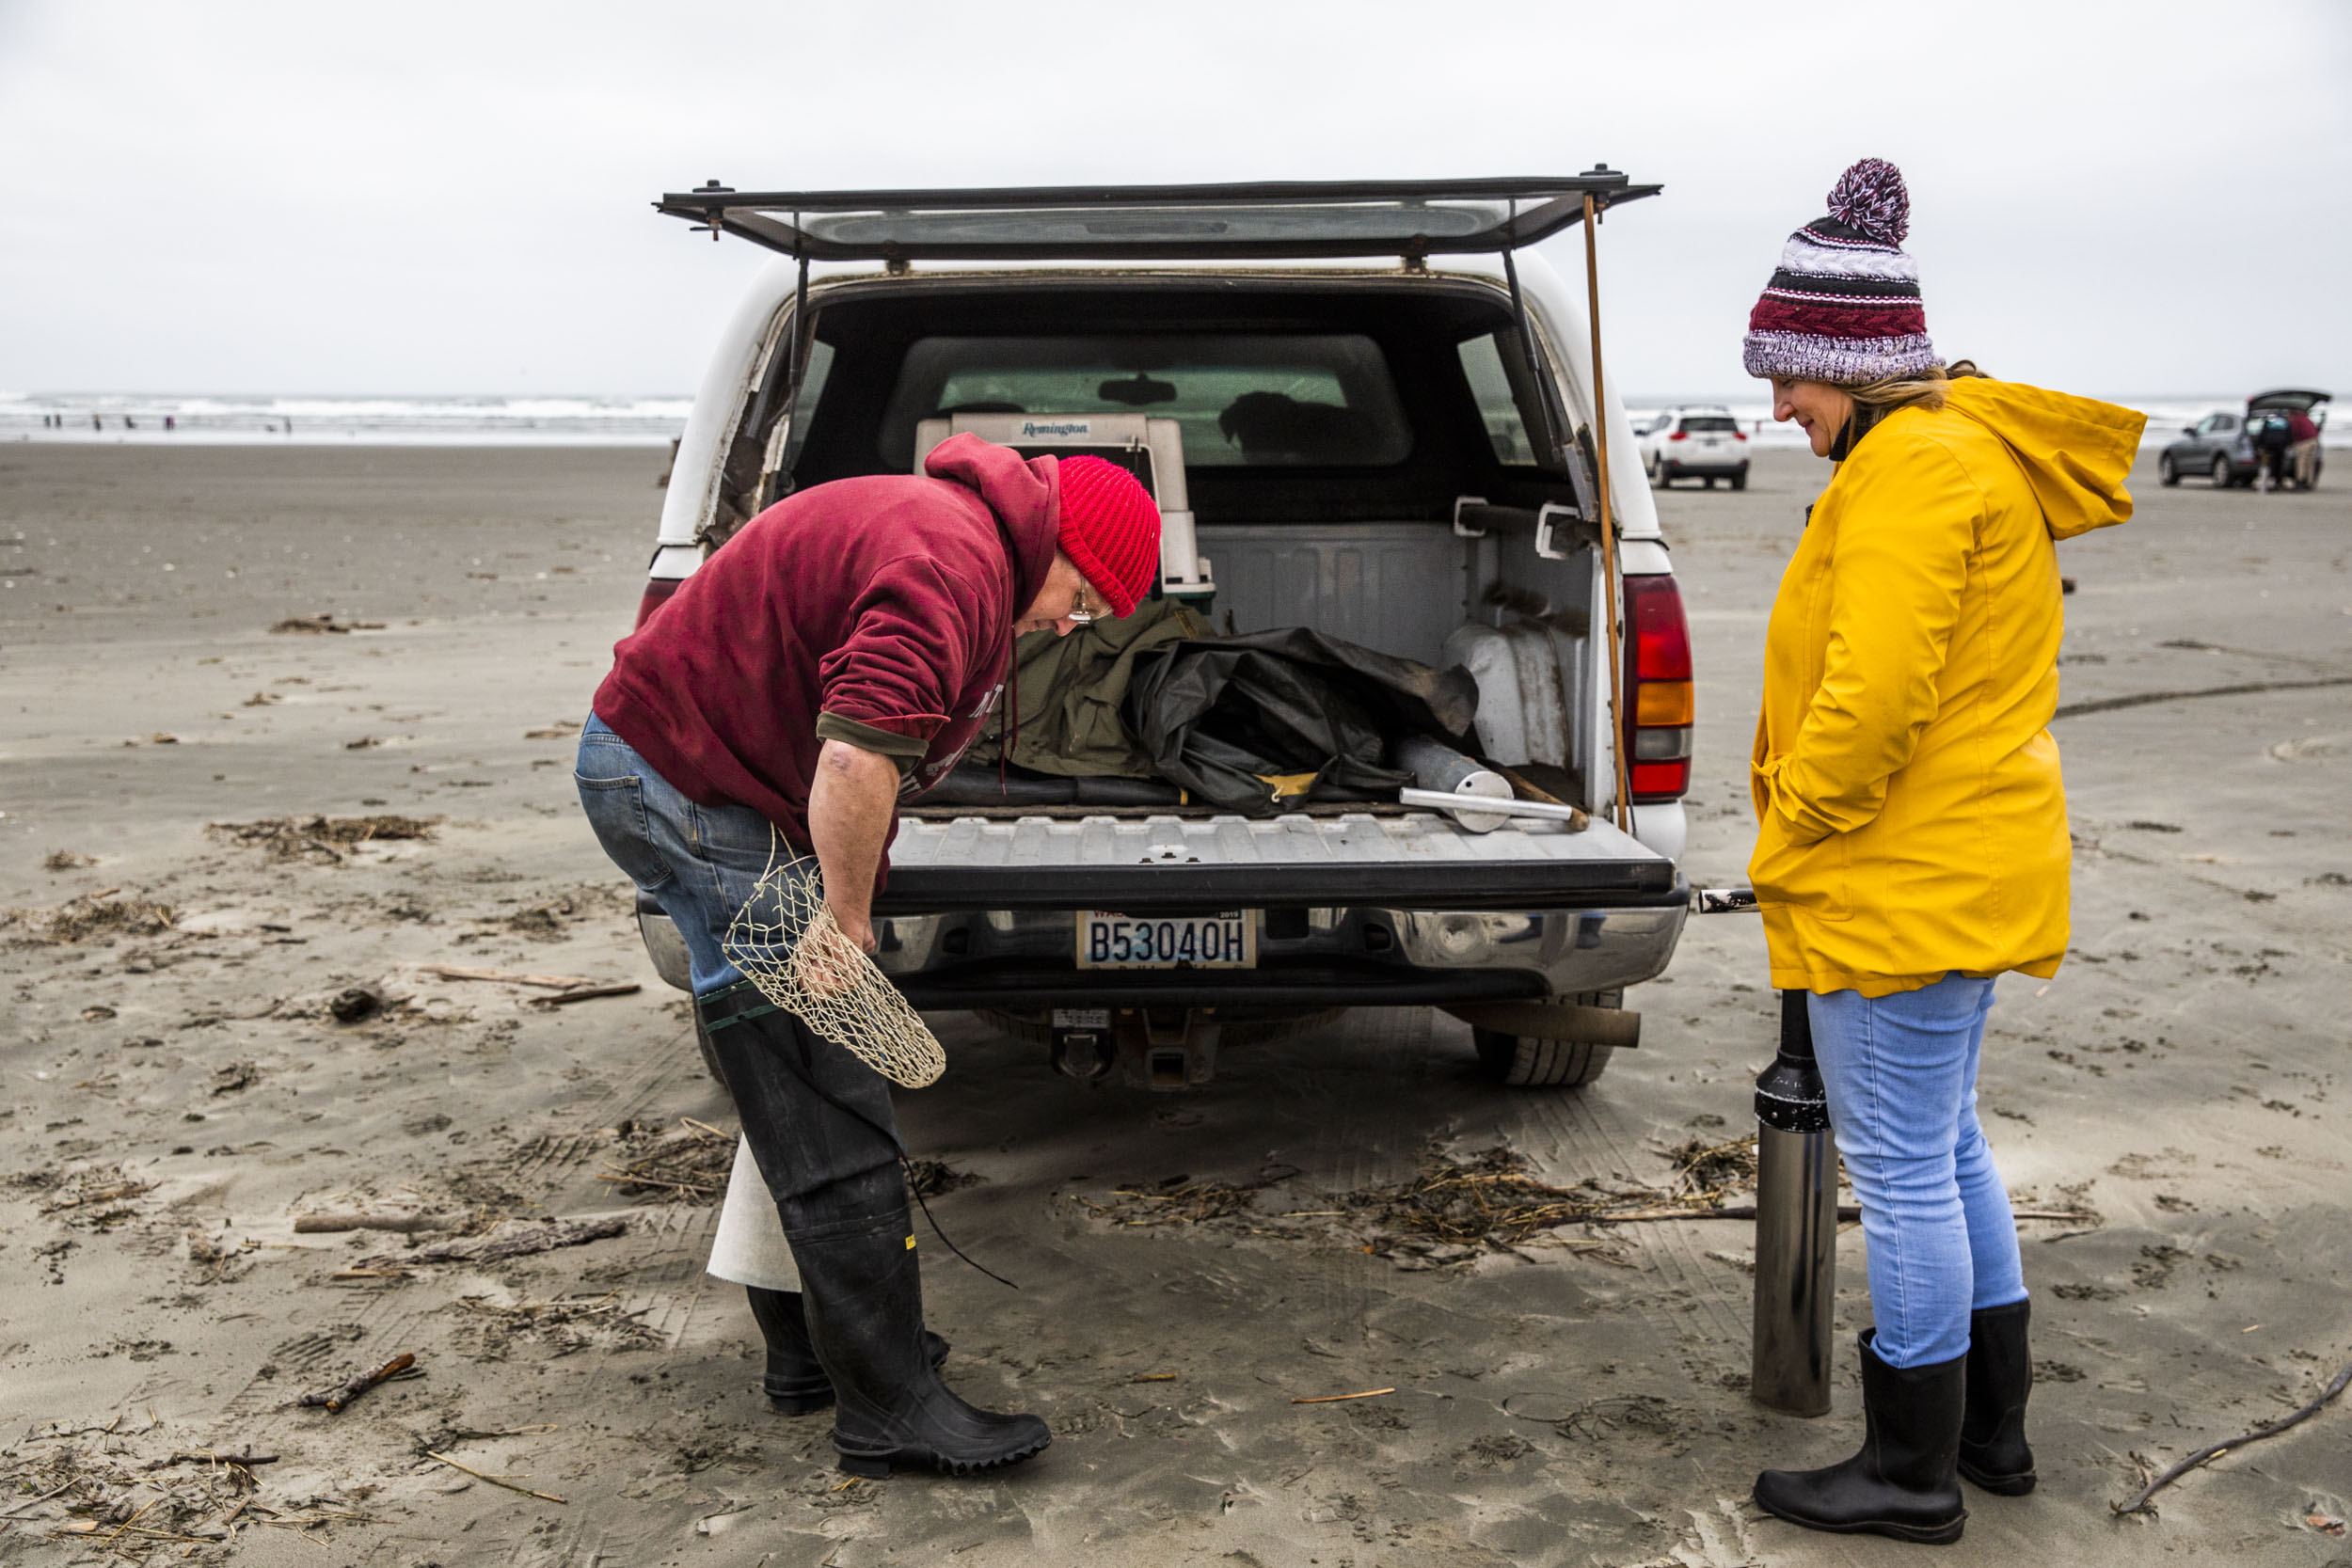 WDFW Coastal Shellfish Manager Dan Ayres and his wife Gail of Montesano get their gear out of their truck before digging for razor clams at Grayland Beach State Park in Grayland, Wash. on Wednesday, Jan. 2, 2019.